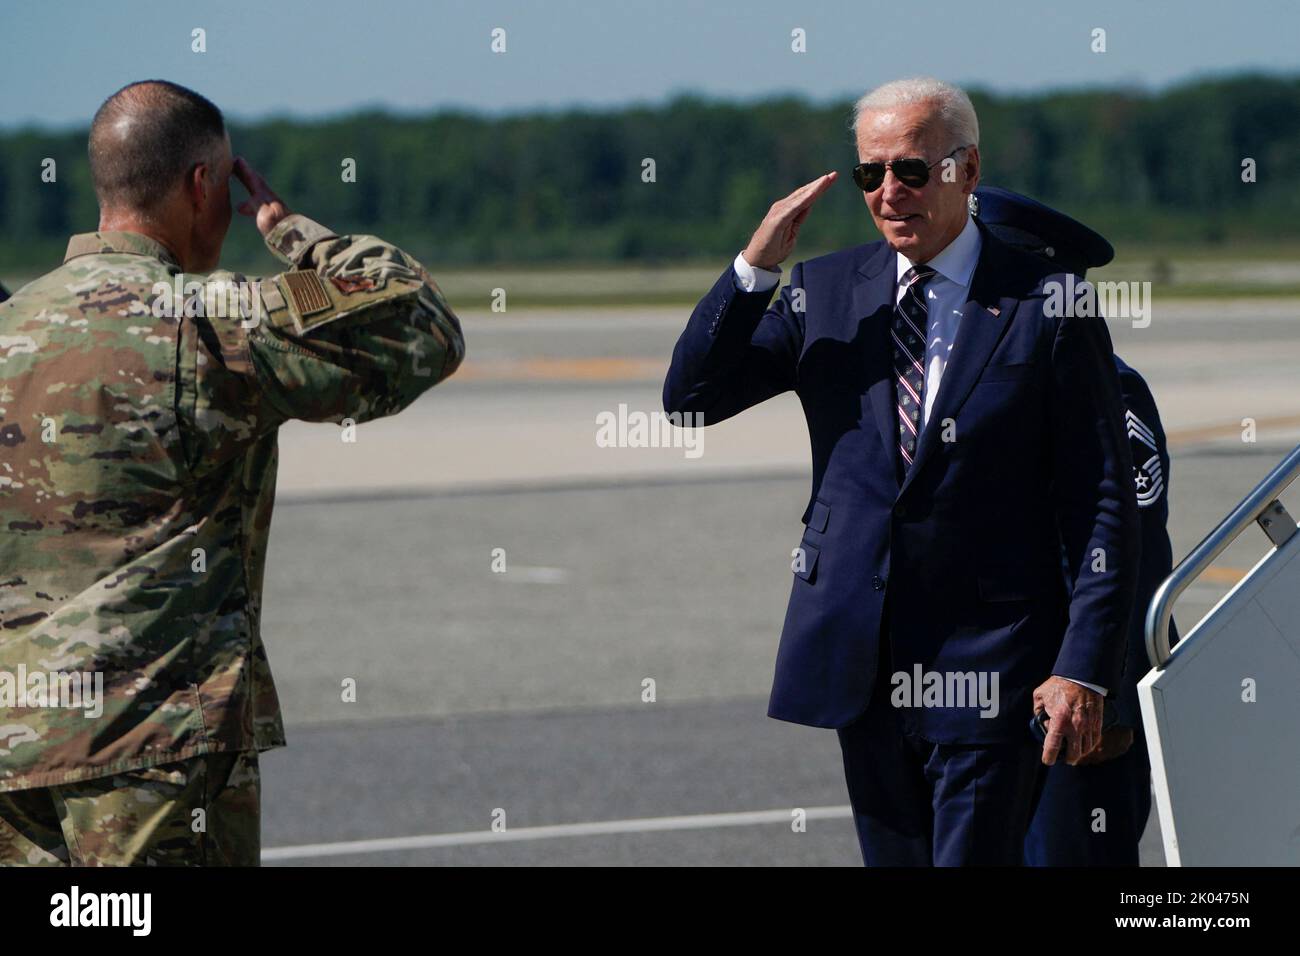 U.S. President Joe Biden salutes as he descends from Air Force One at Dover Air Force Base in Dover, Delaware, U.S. September 9, 2022. REUTERS/Joshua Roberts Stock Photo